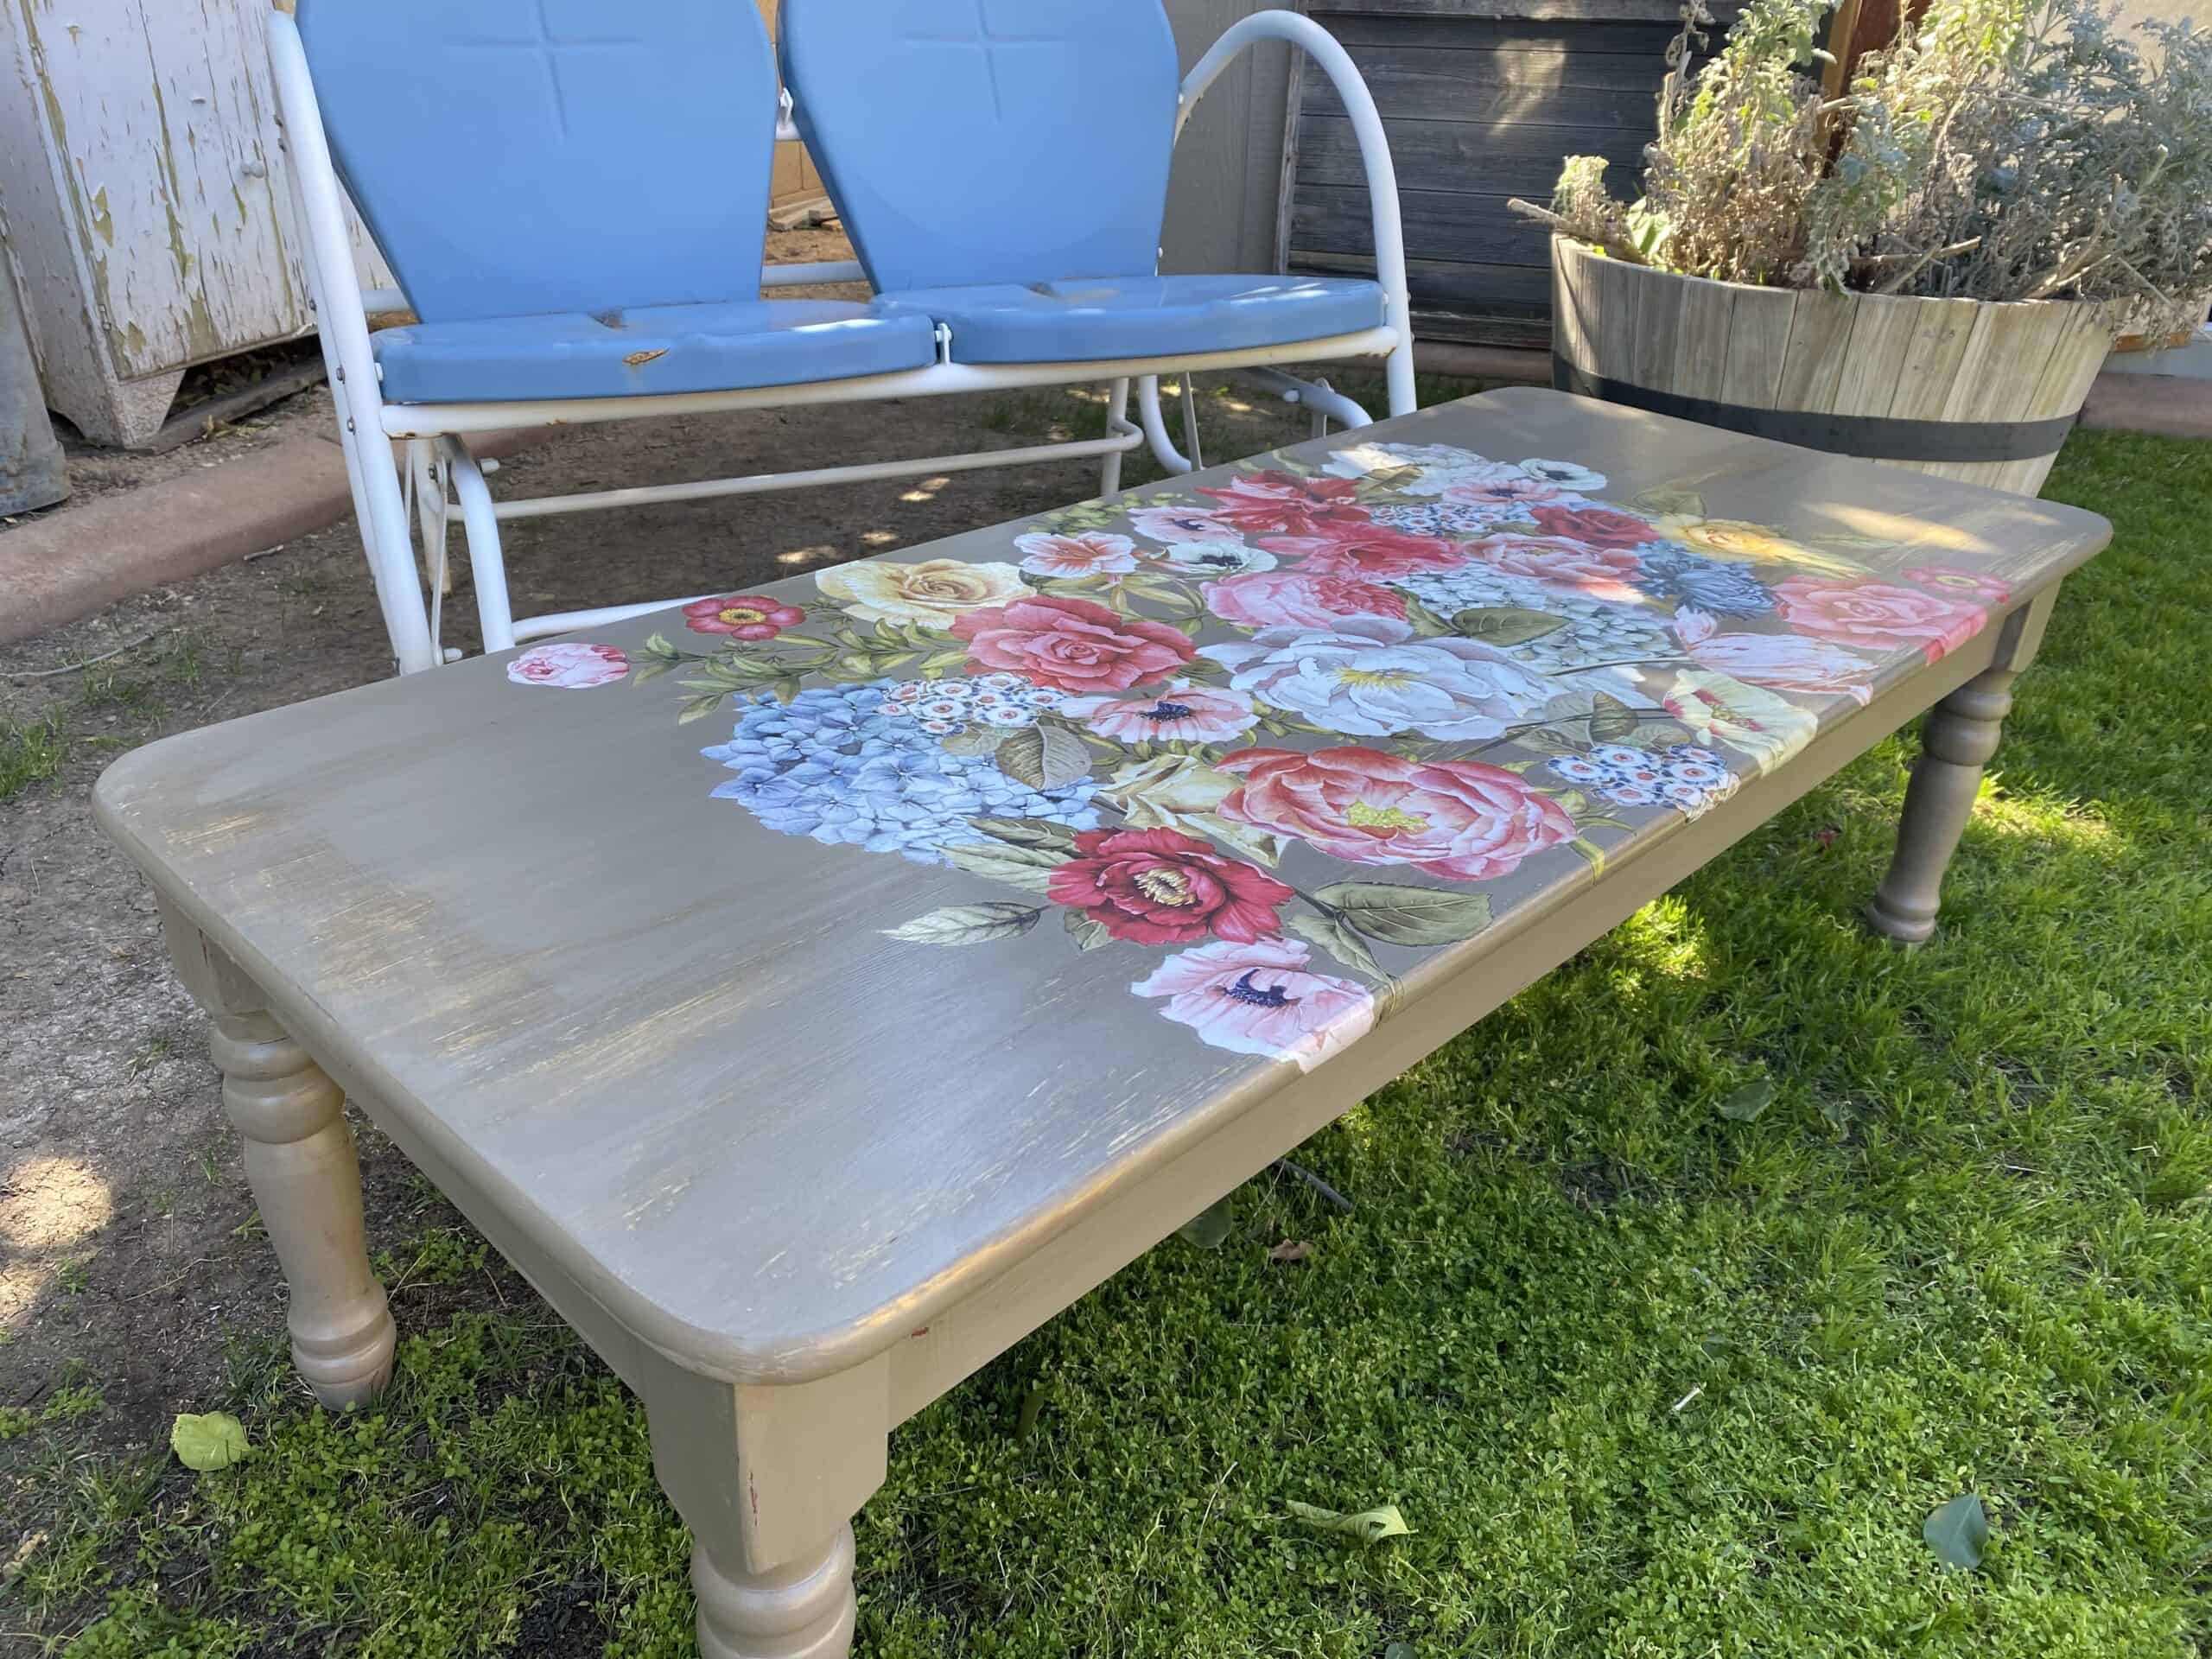 Apply a furniture transfer to a yard sale find!